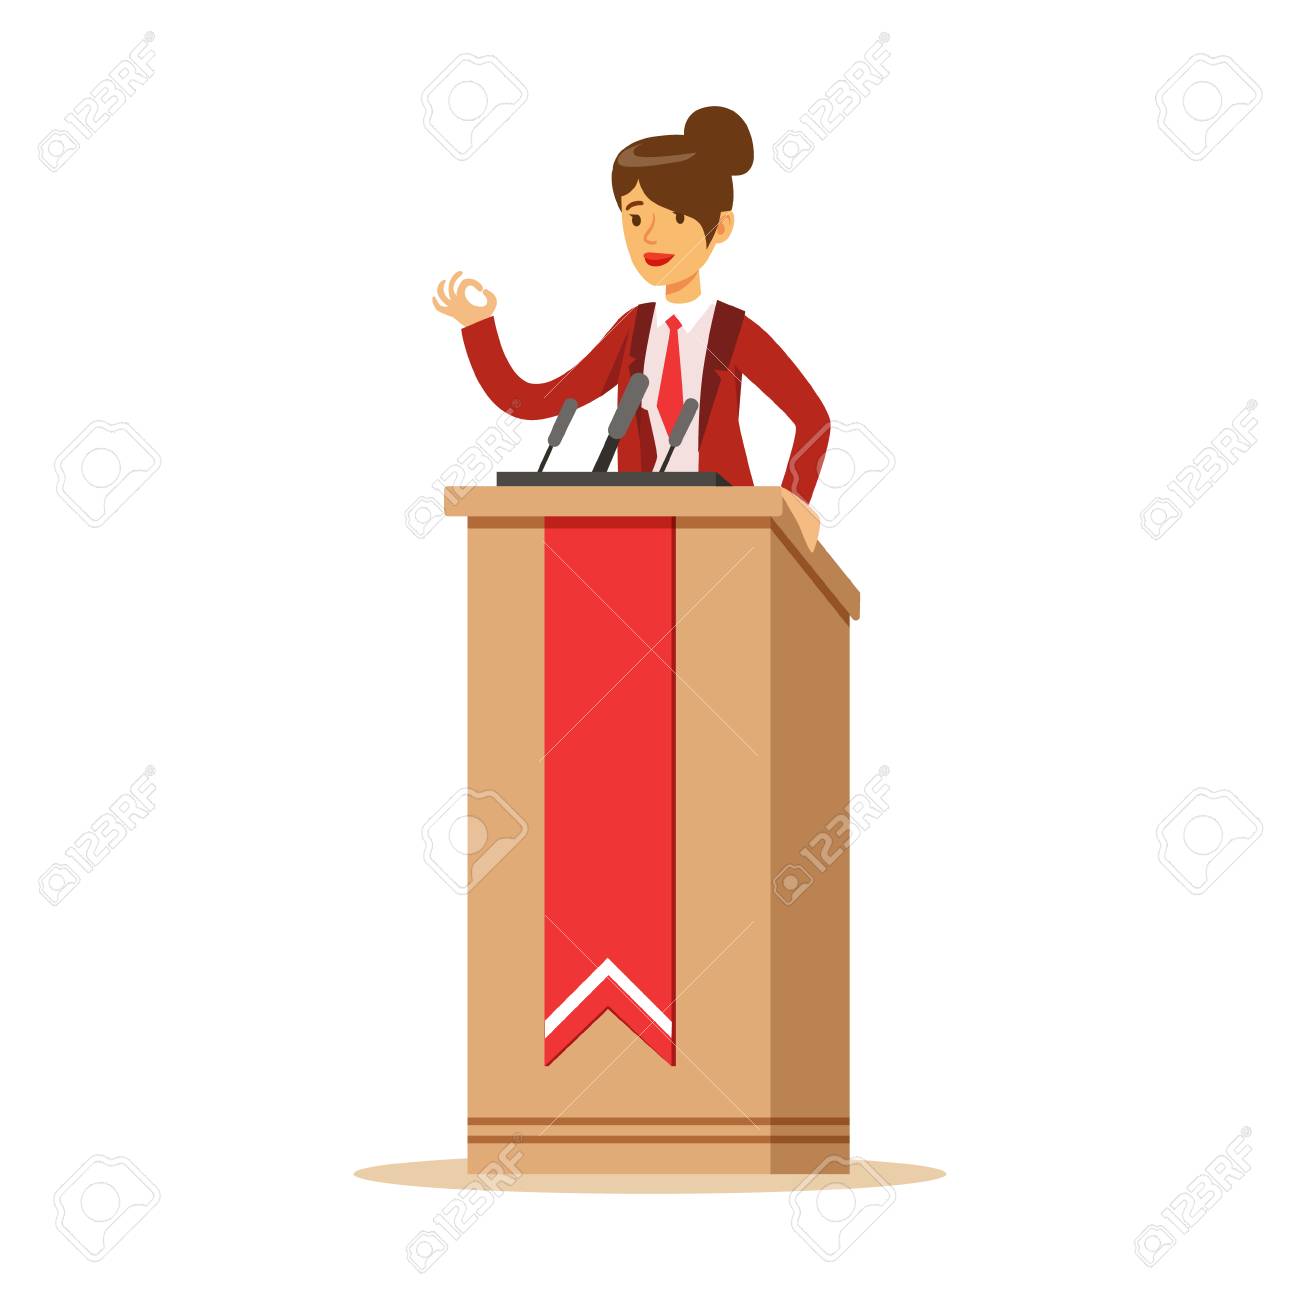 Young politician woman speaking behind the podium, public speaker...